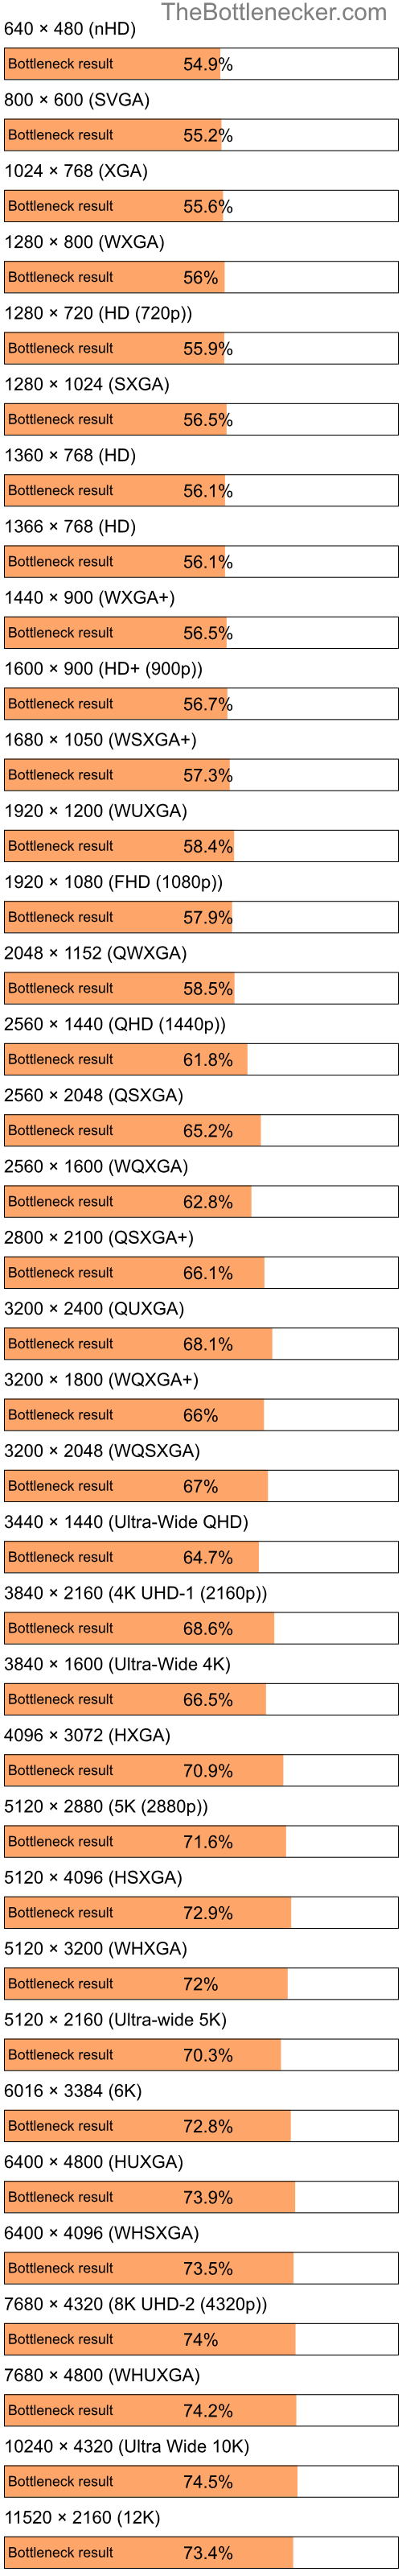 Bottleneck results by resolution for Intel Pentium 4 and AMD Radeon 3000 in Processor Intense Tasks